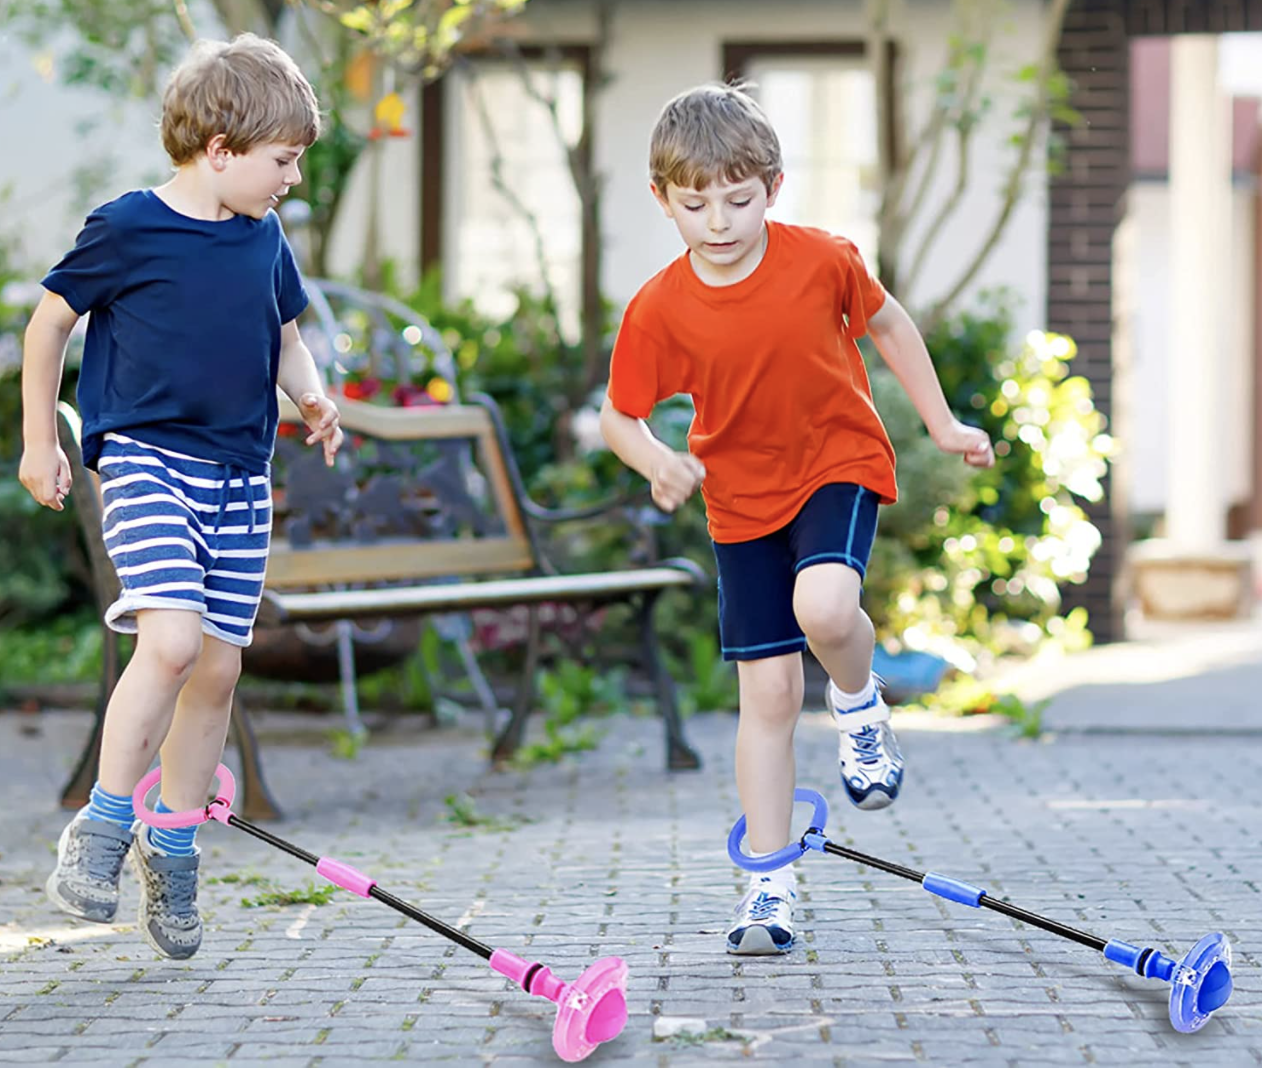 children with pink and blue Skip It-like toys around their ankles